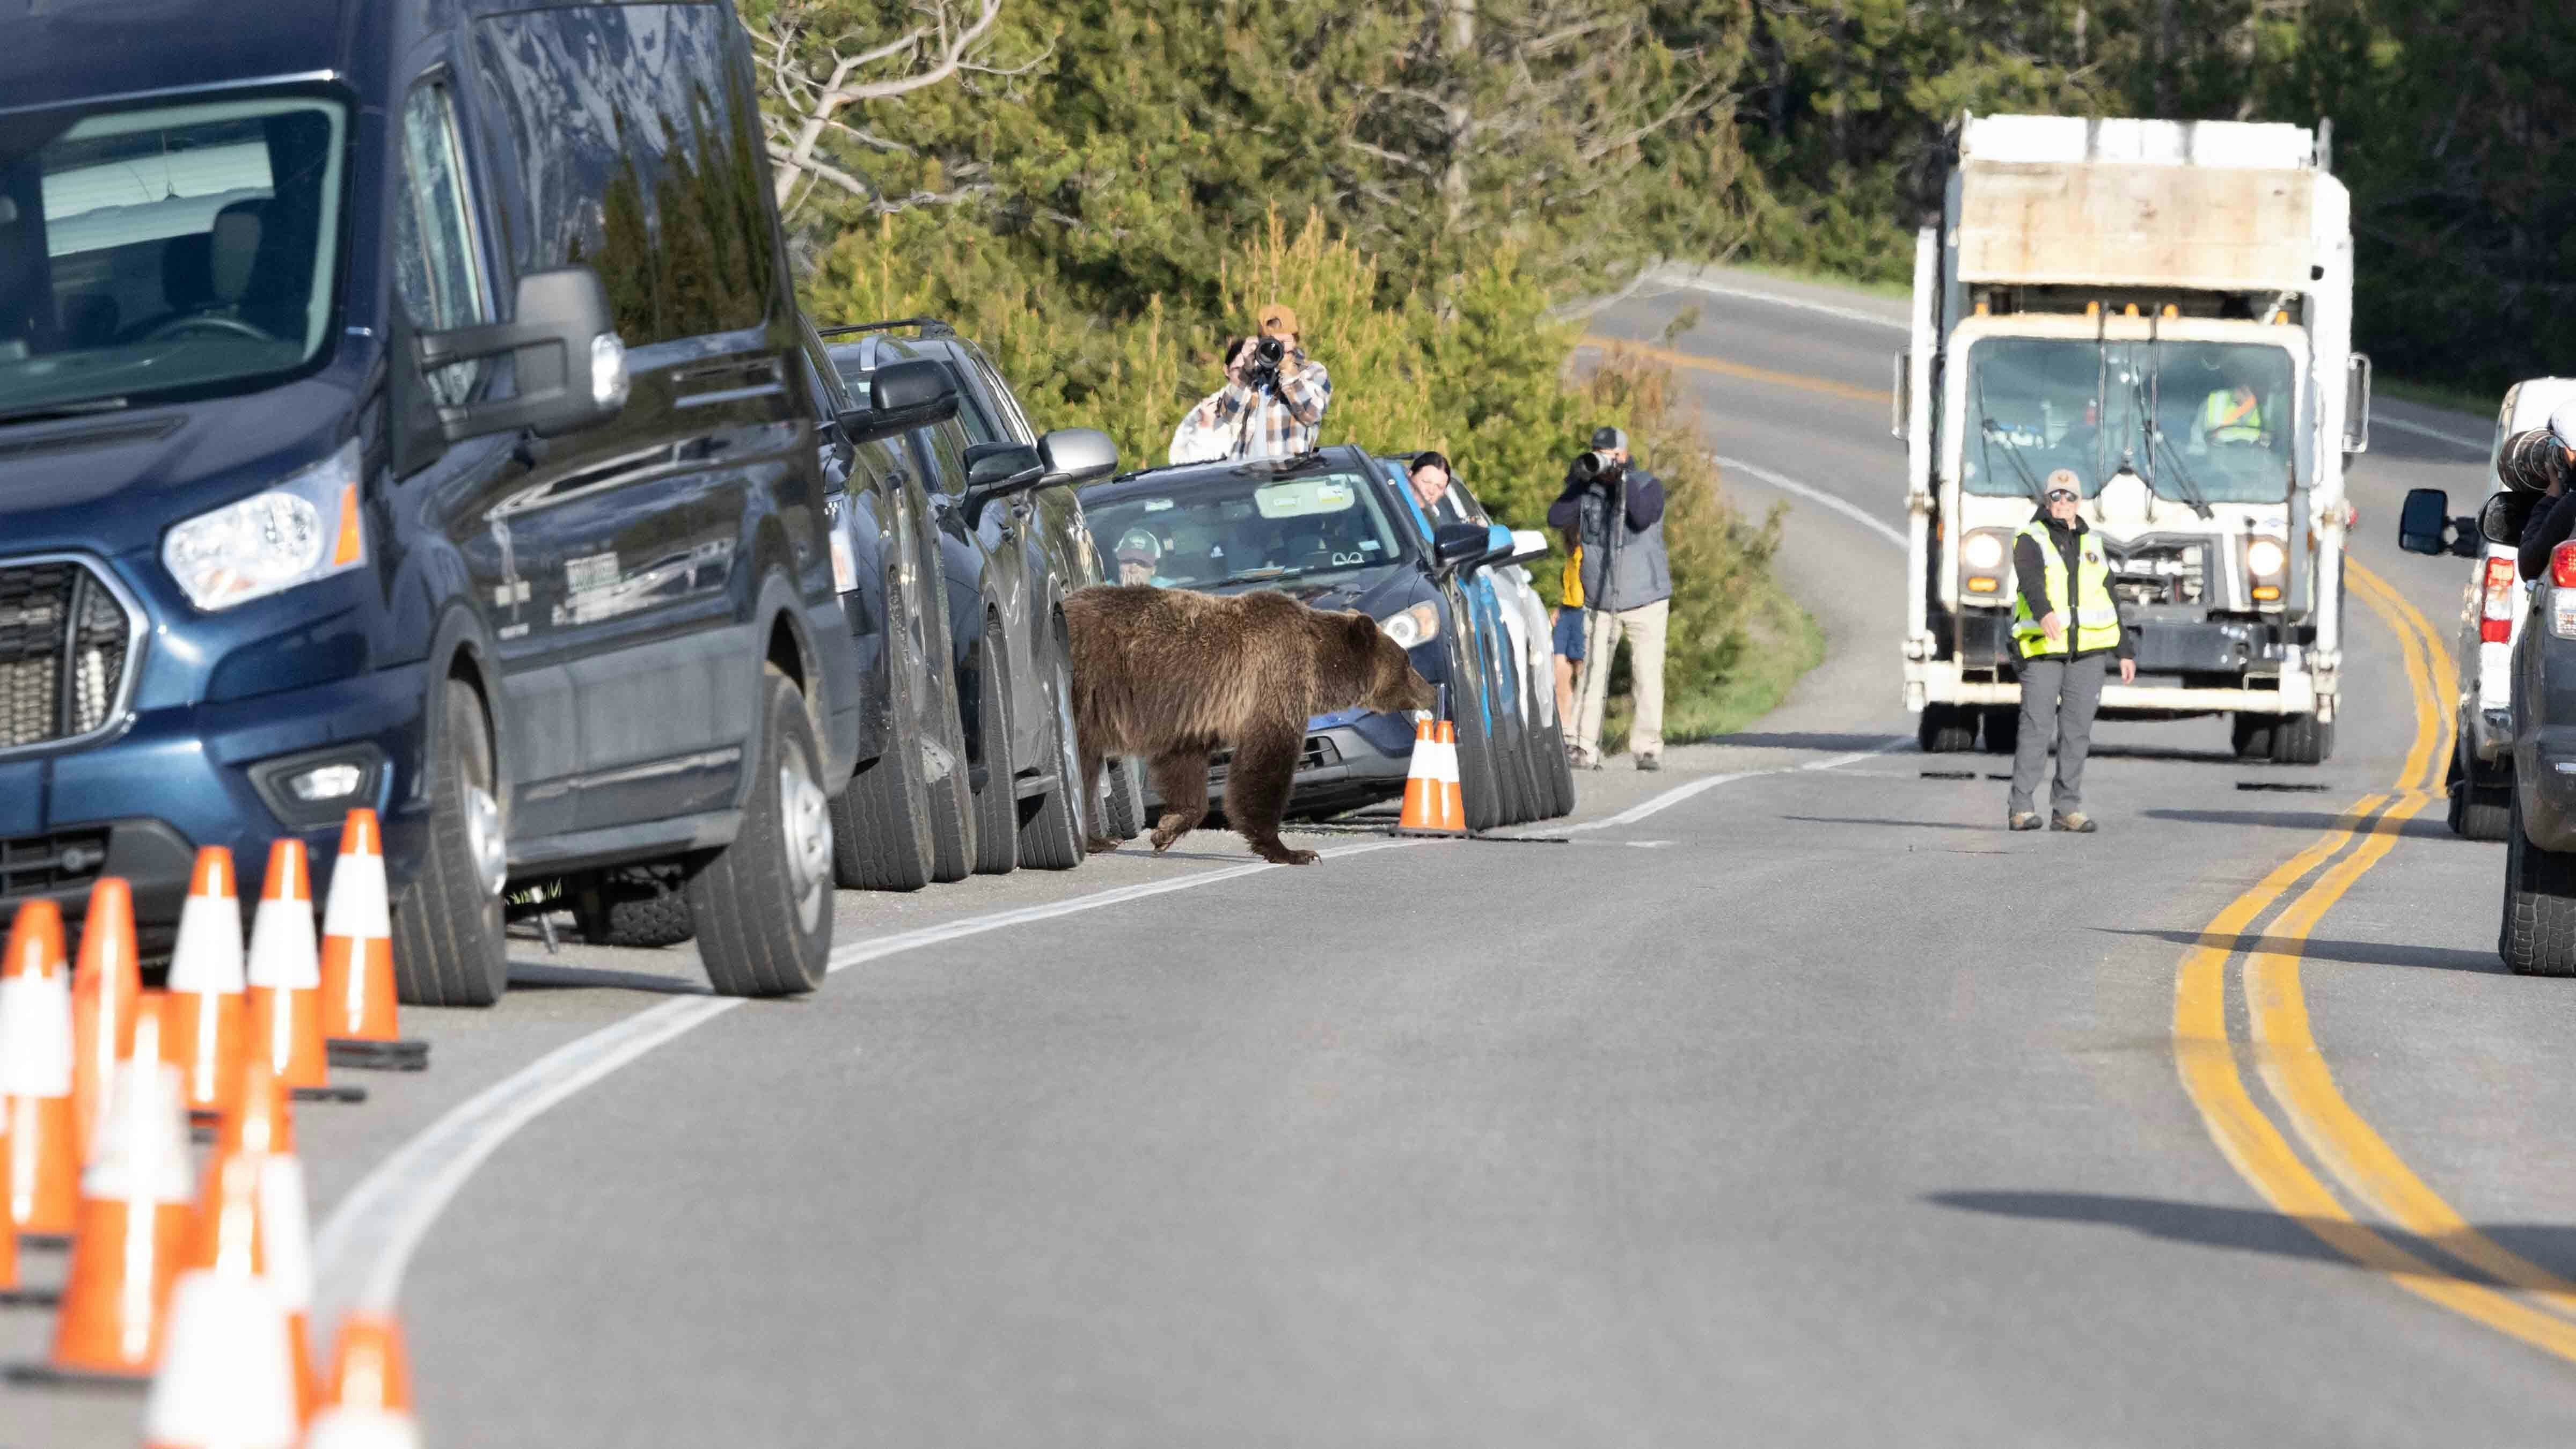 Kari Godfrey of Minnesota says she took a series of photos through a telephoto lens during a “bear jam” May 27 in Teton Park. She said this was the same incident during which a controversial photo of Grizzly 610 next to a pickup truck was taken.